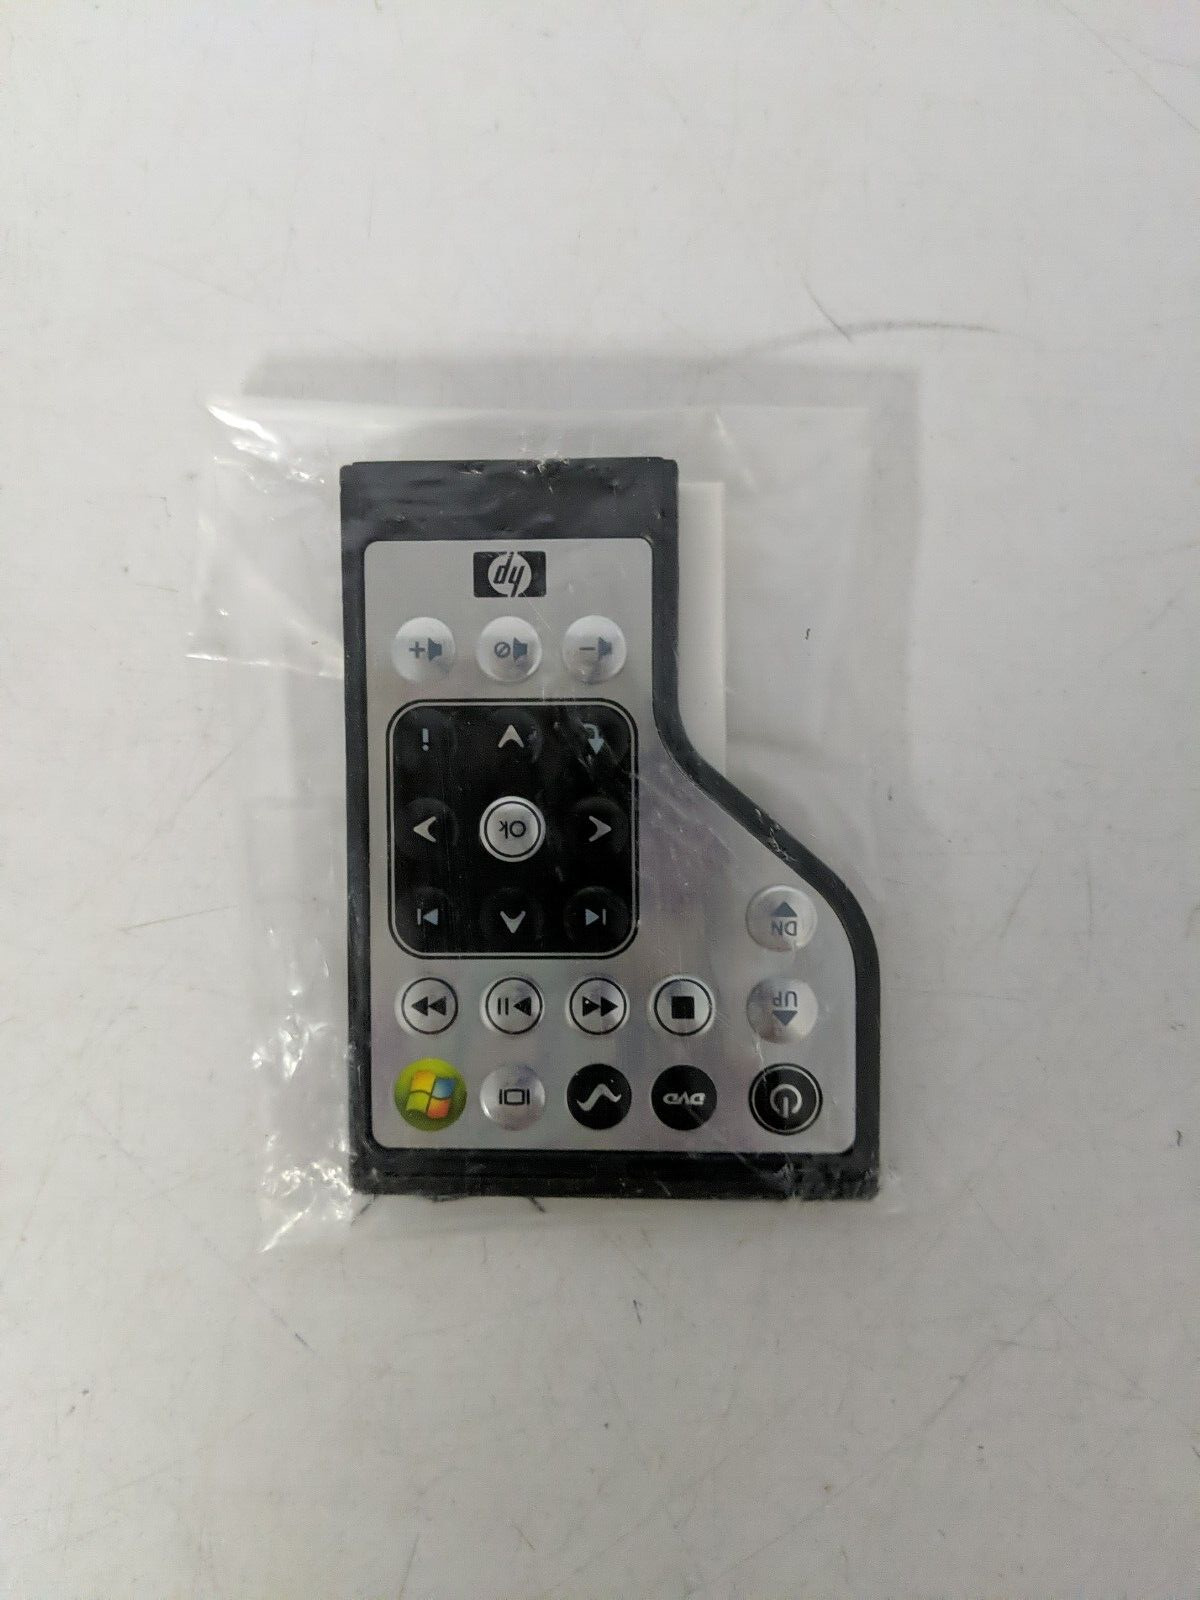 Hewlett Packard HP Remote Control 463979-002 with battery